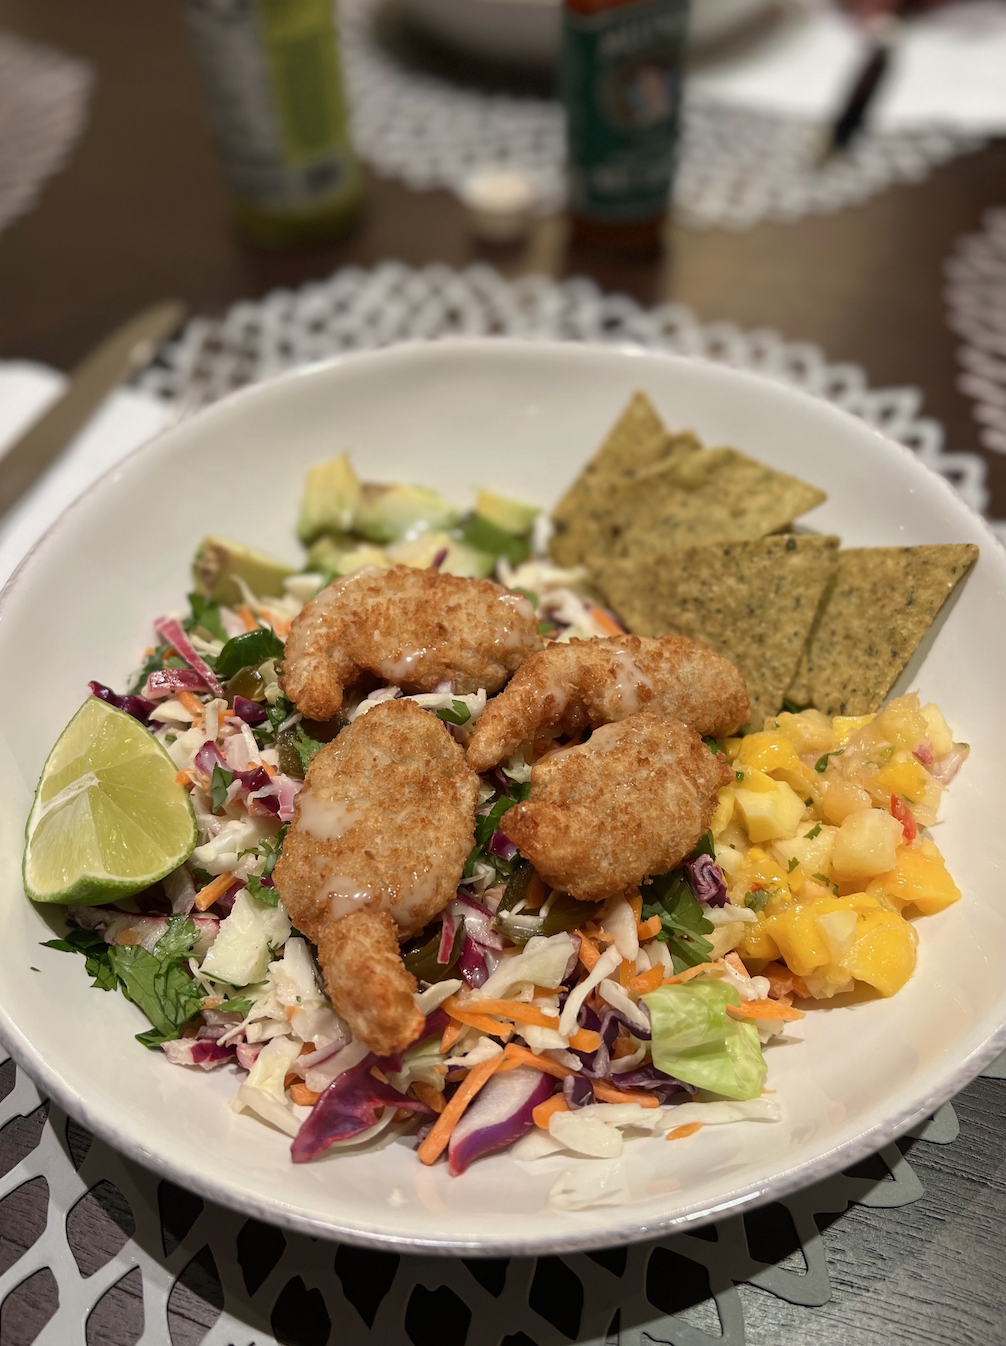 A plate with salad, avocado, lime wedges, shrimp, and tortilla chips on a table